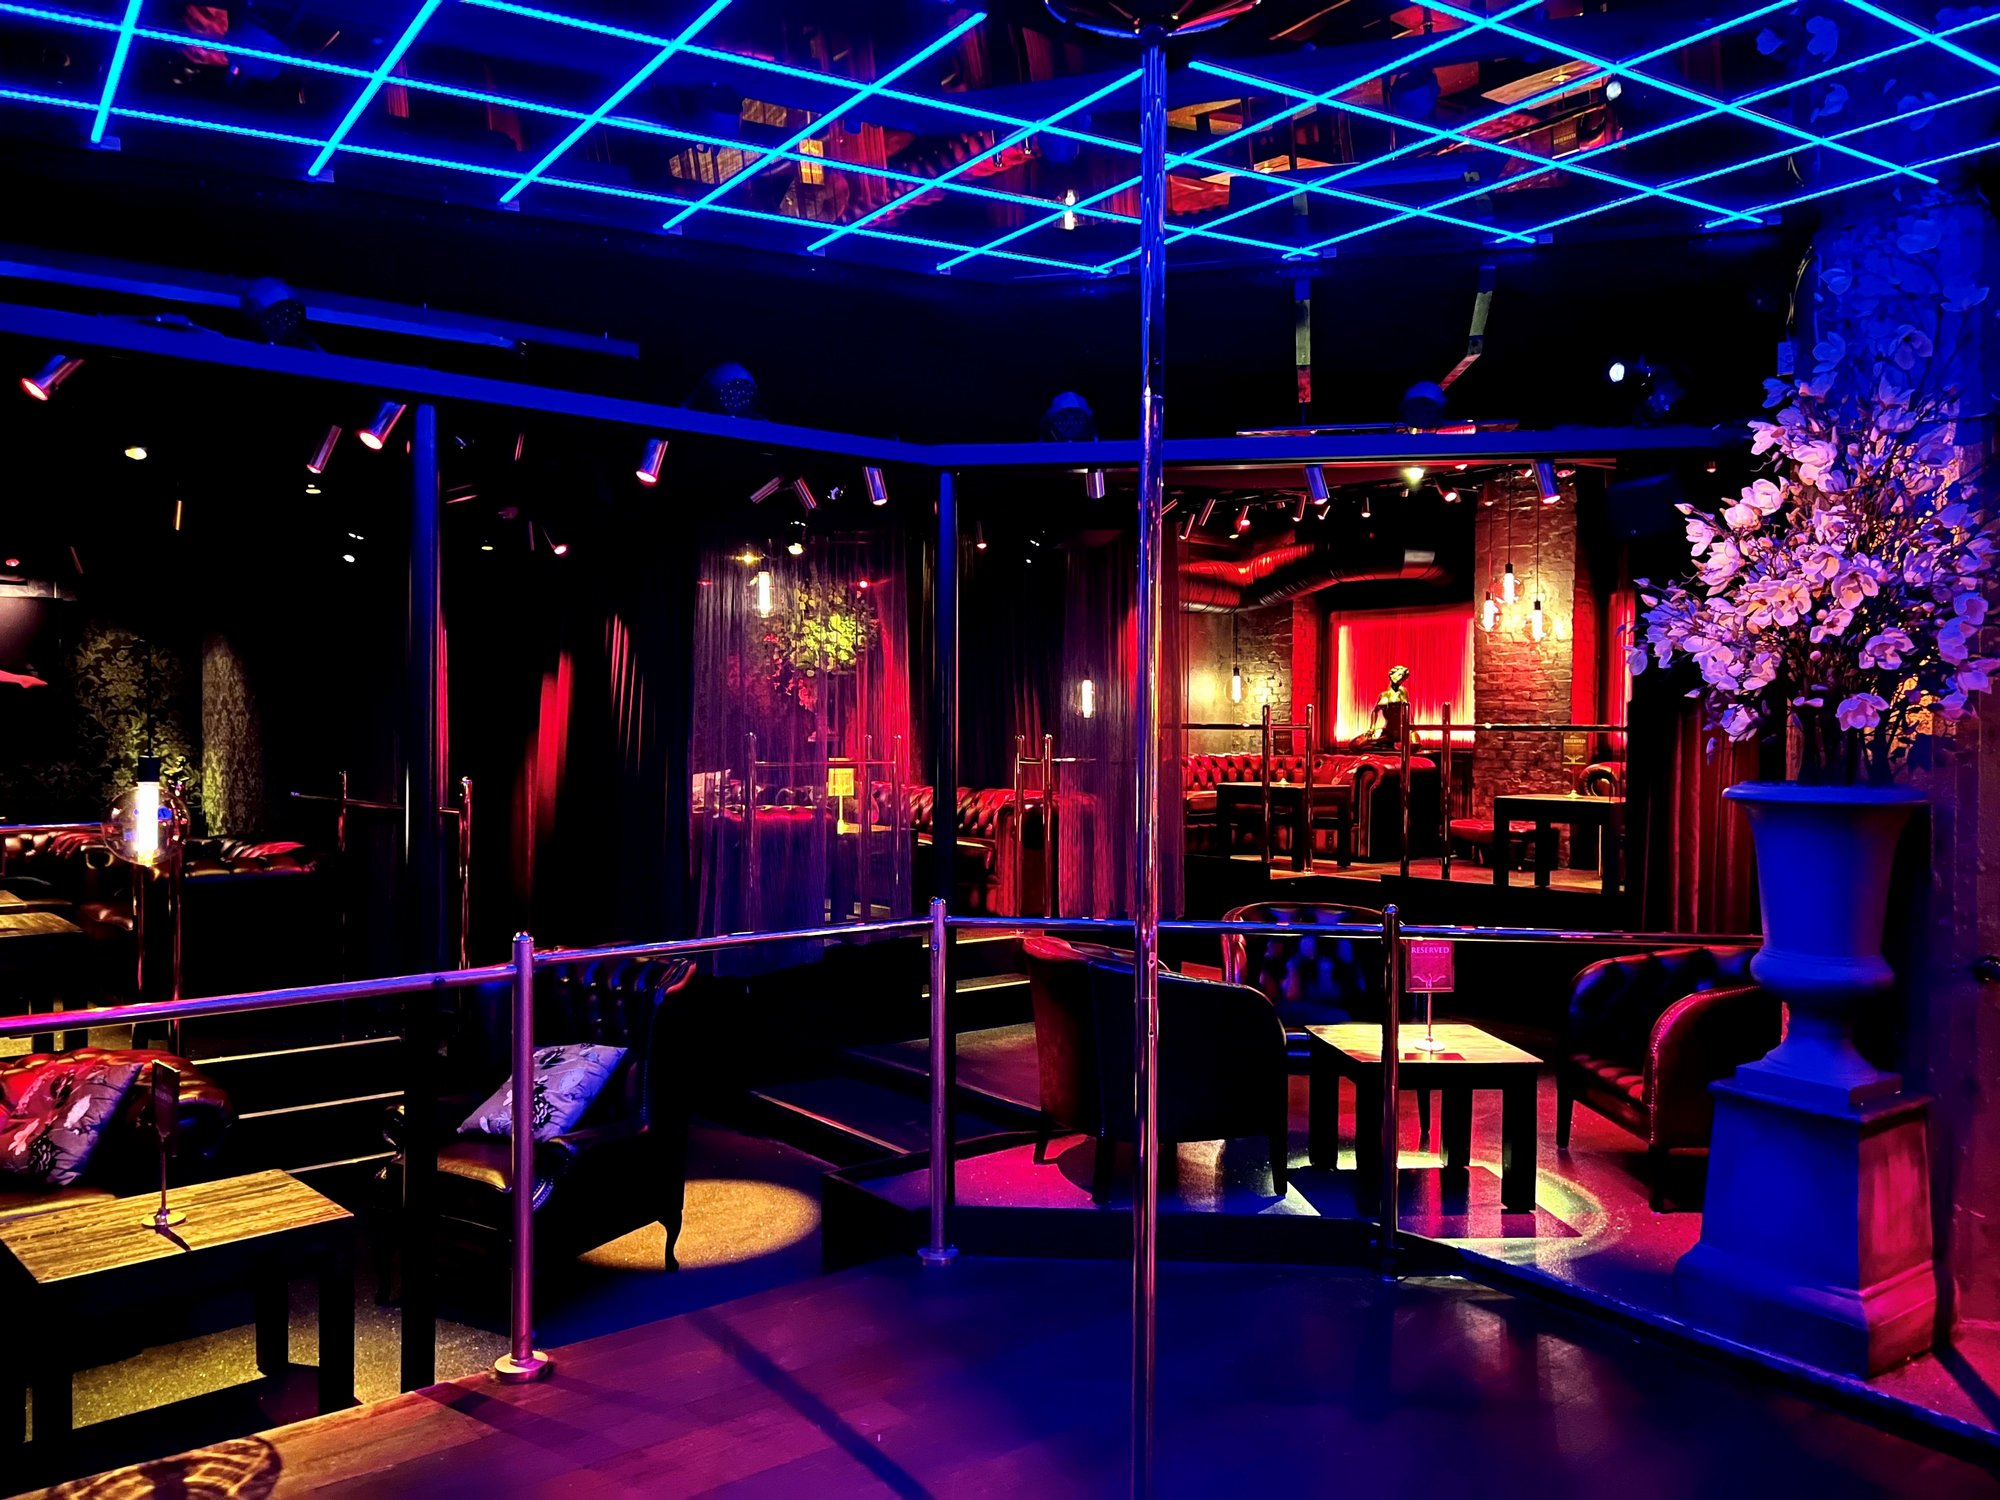 See pictures of our exclusive Gentlemens Club